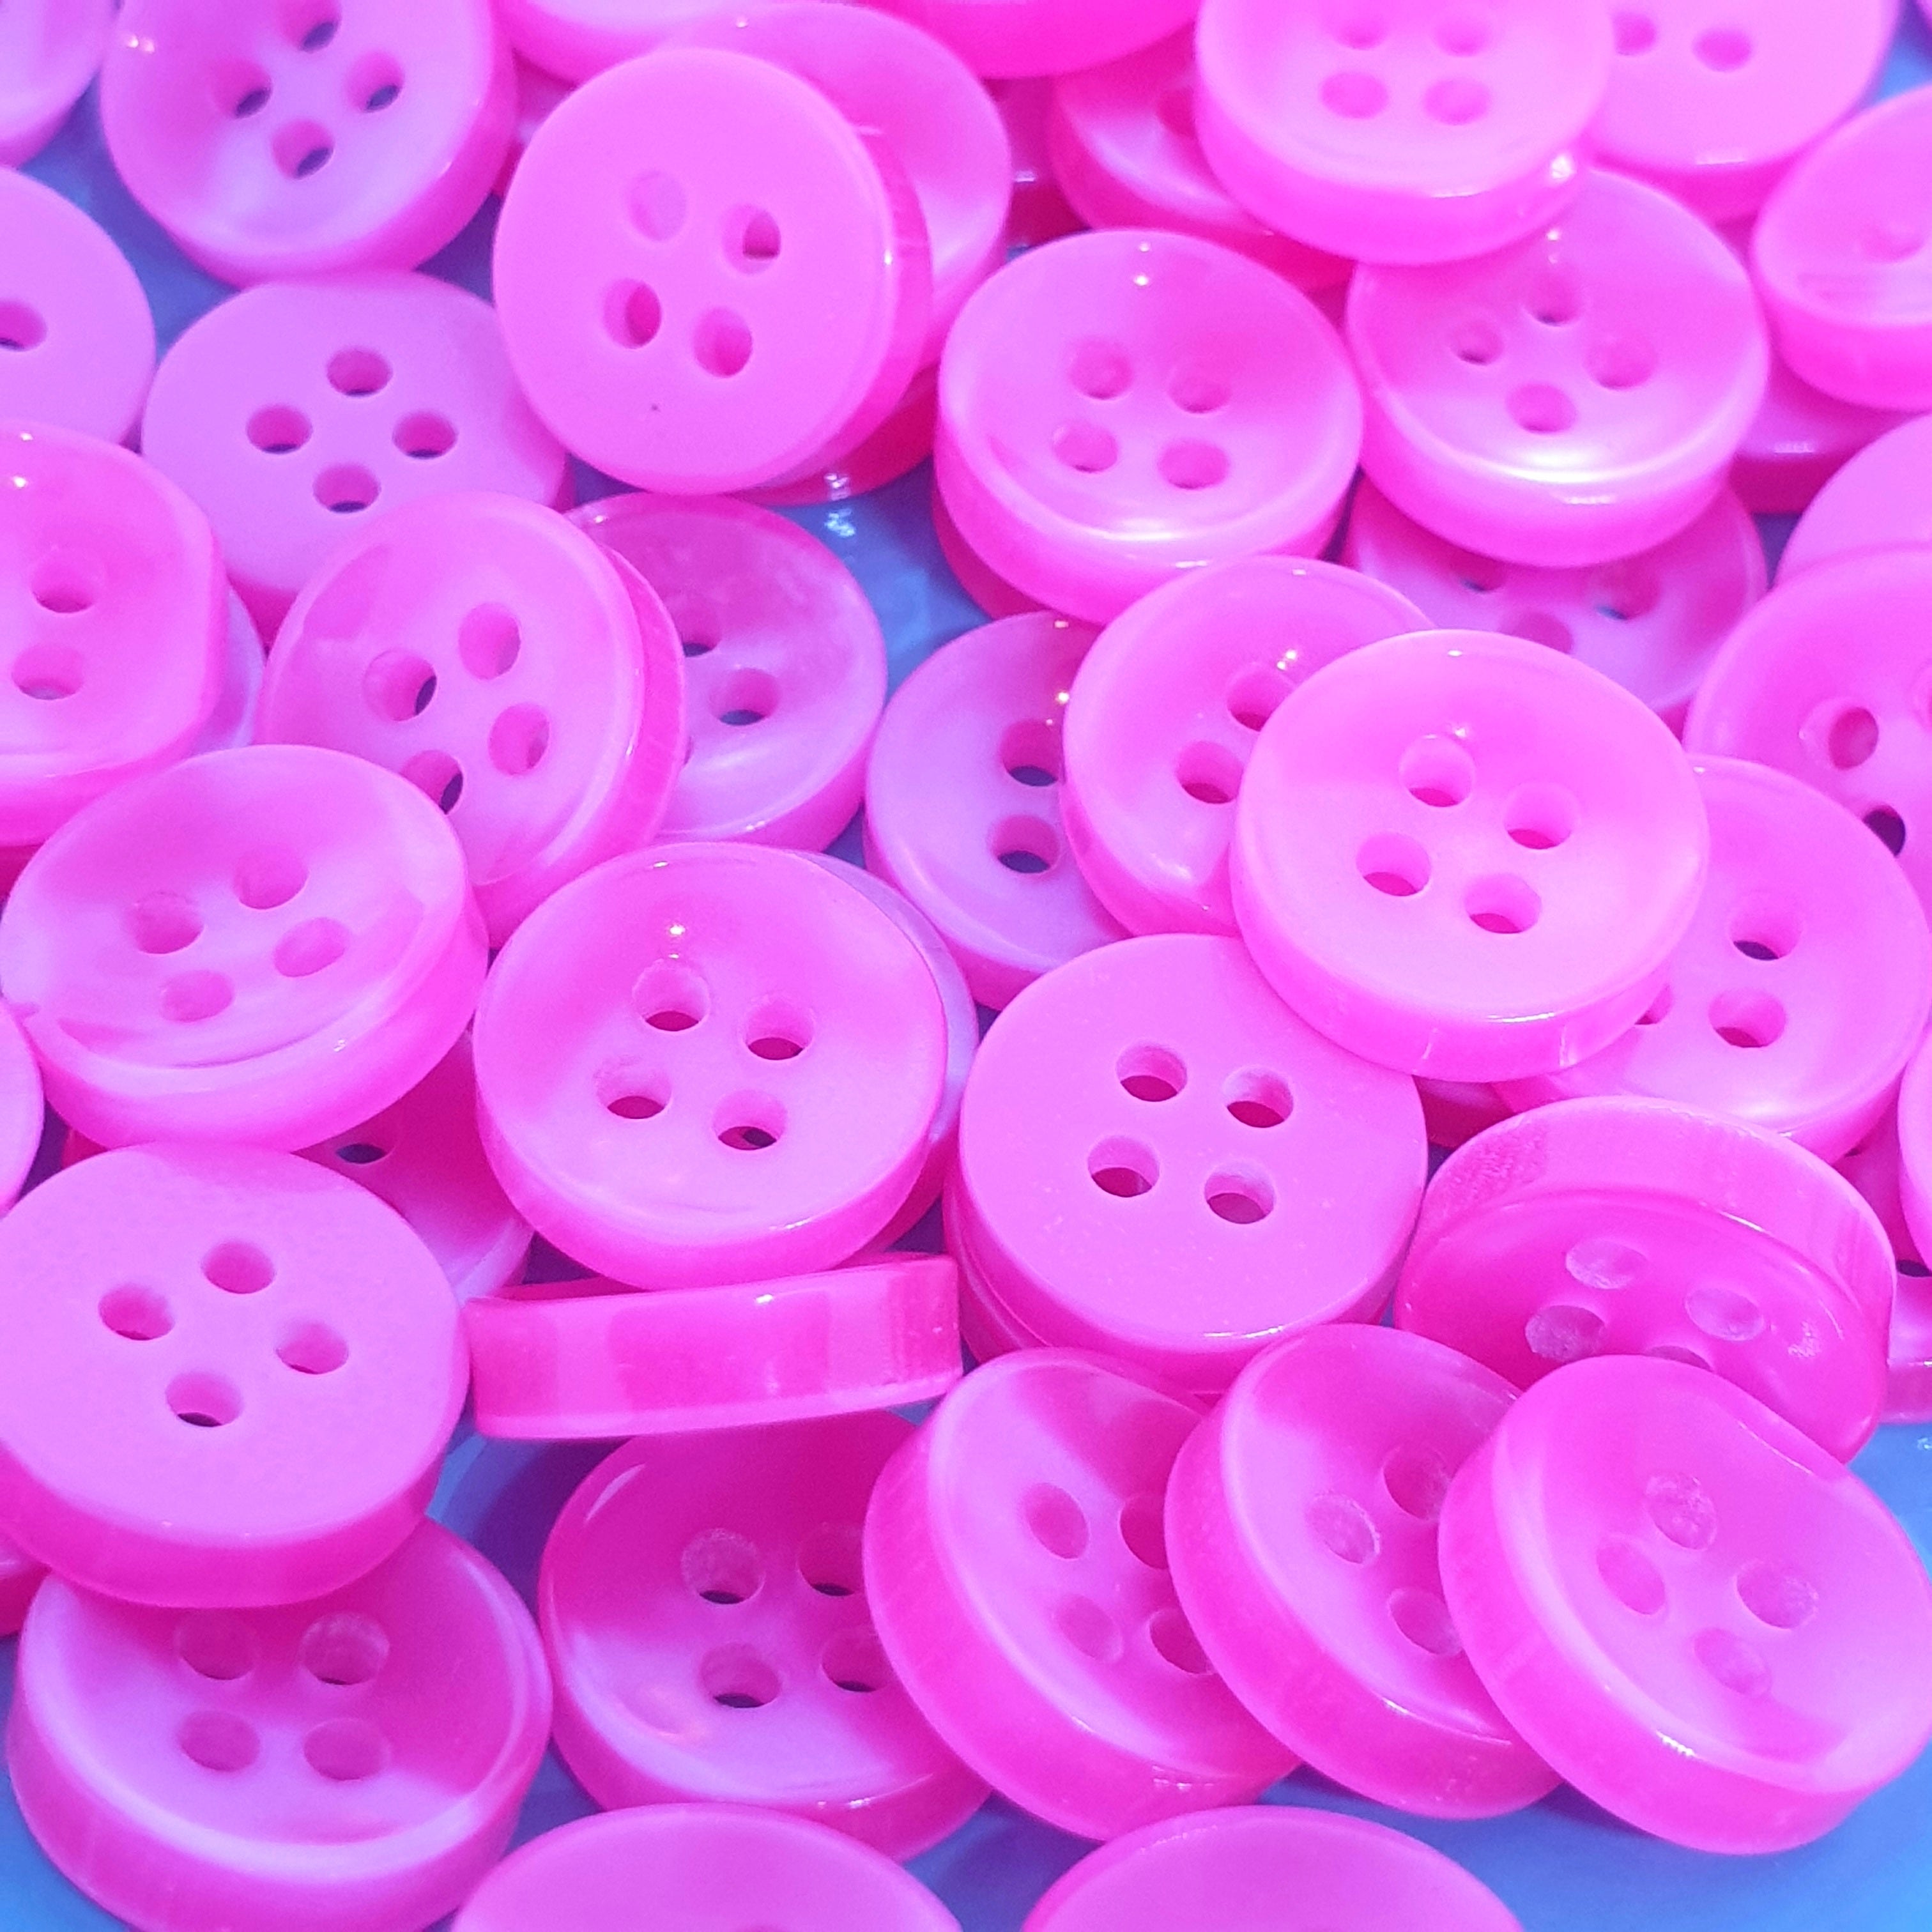 MajorCrafts 80pcs 11.5mm Bright Pink Pearlescent 4 Holes High-Grade Round Resin Small Sewing Buttons